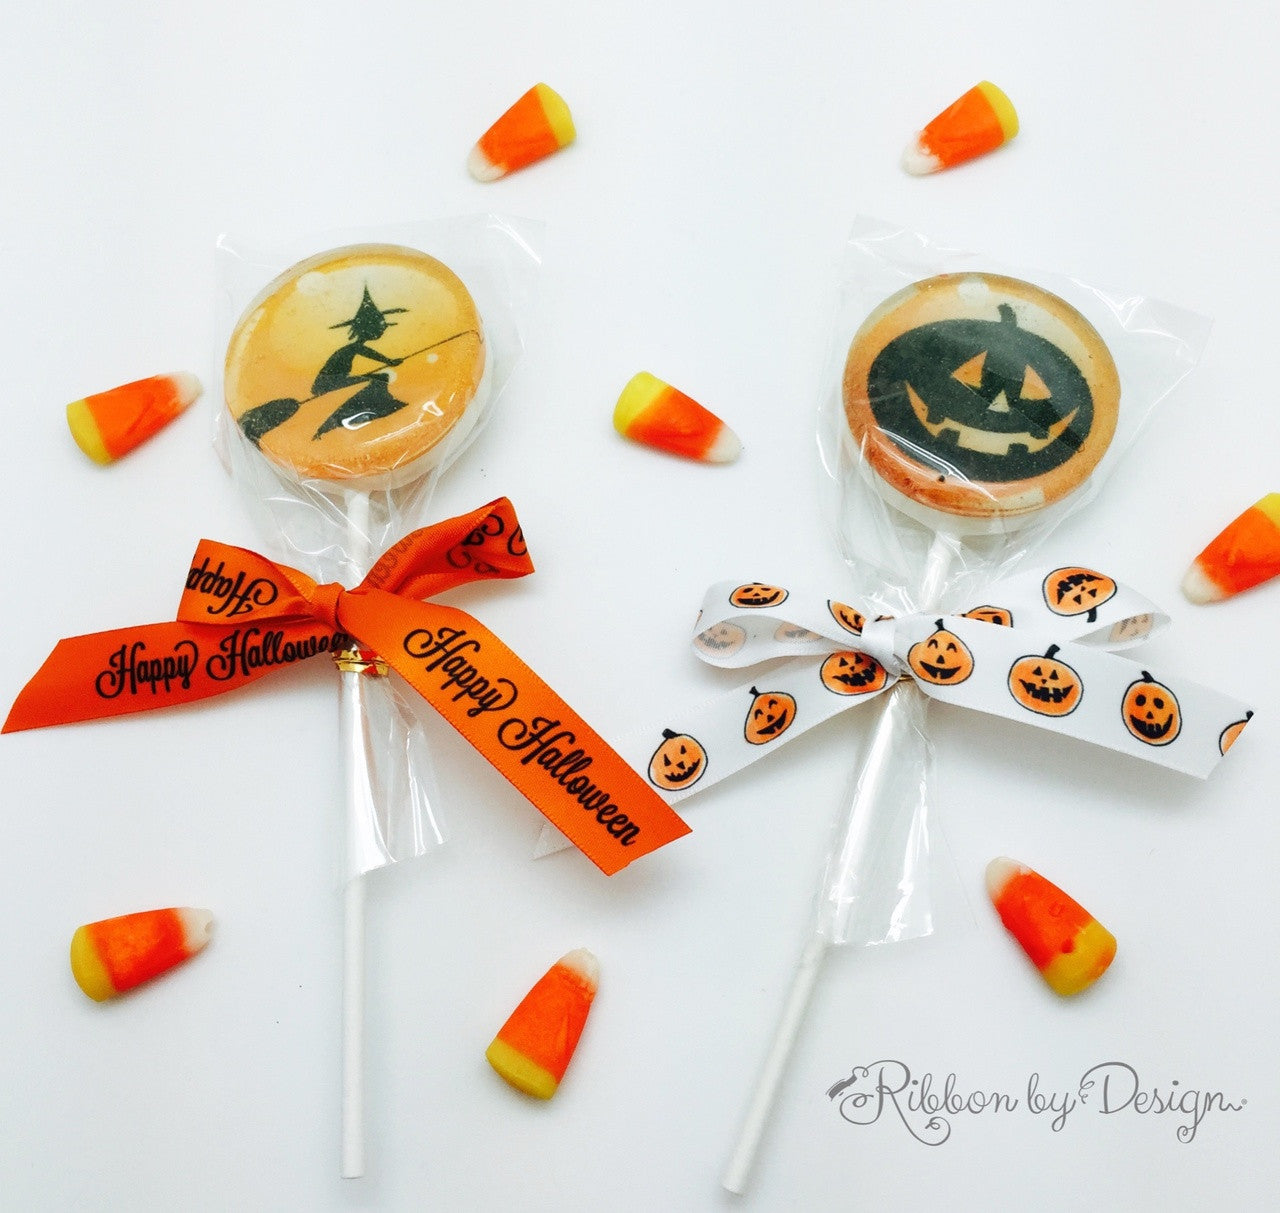 Our Halloween ribbons are just the right way to dress up a lollipop for a special All Hallow's Eve visitor!